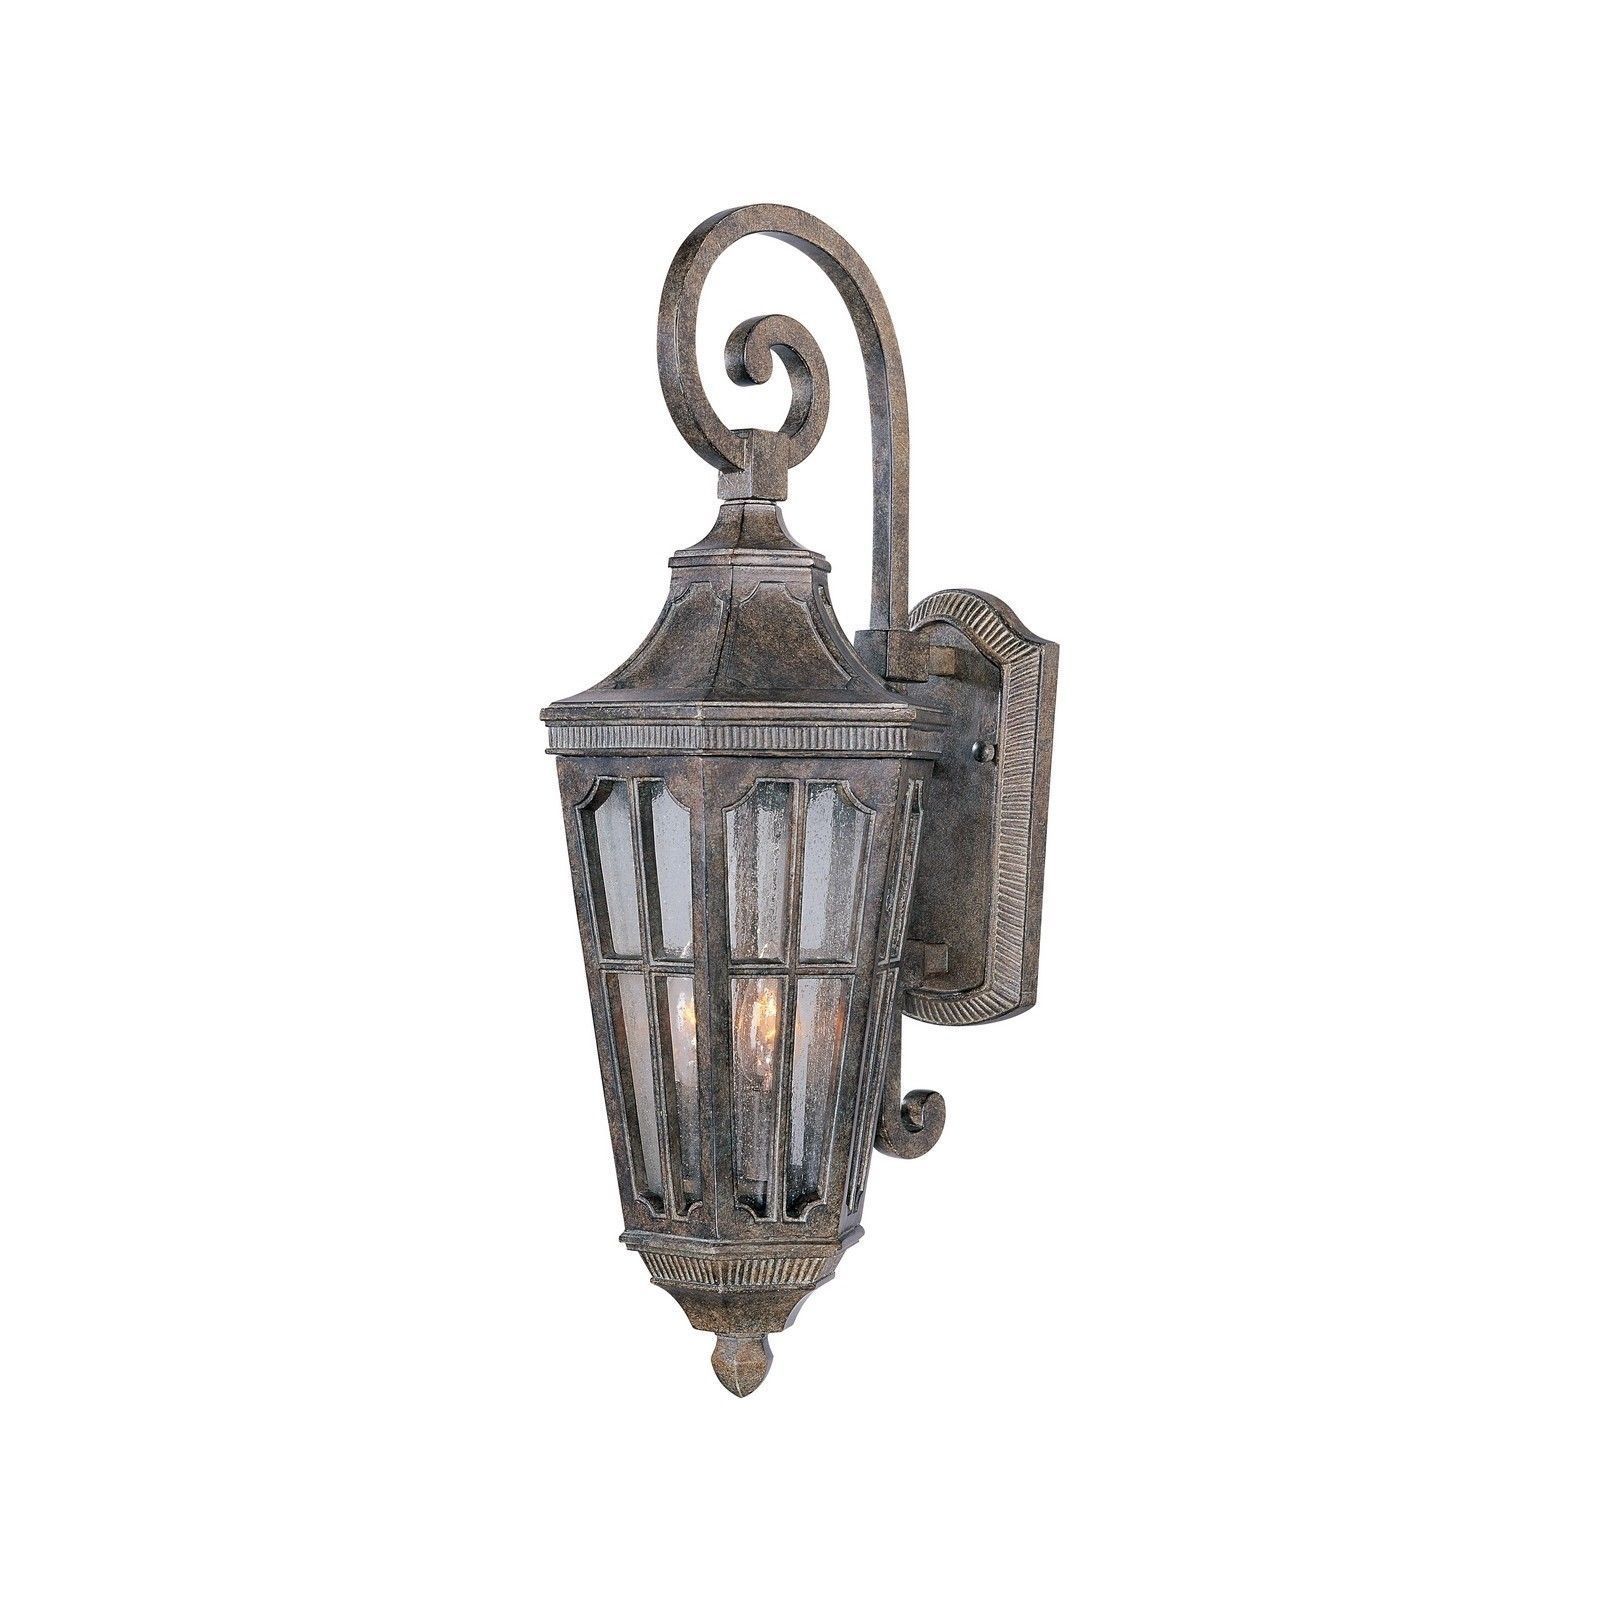 Maxim Vivex Seedy Shade Beacon Hill 2 Light Outdoor Wall Mount Light Throughout Beacon Outdoor Wall Lighting (View 8 of 10)